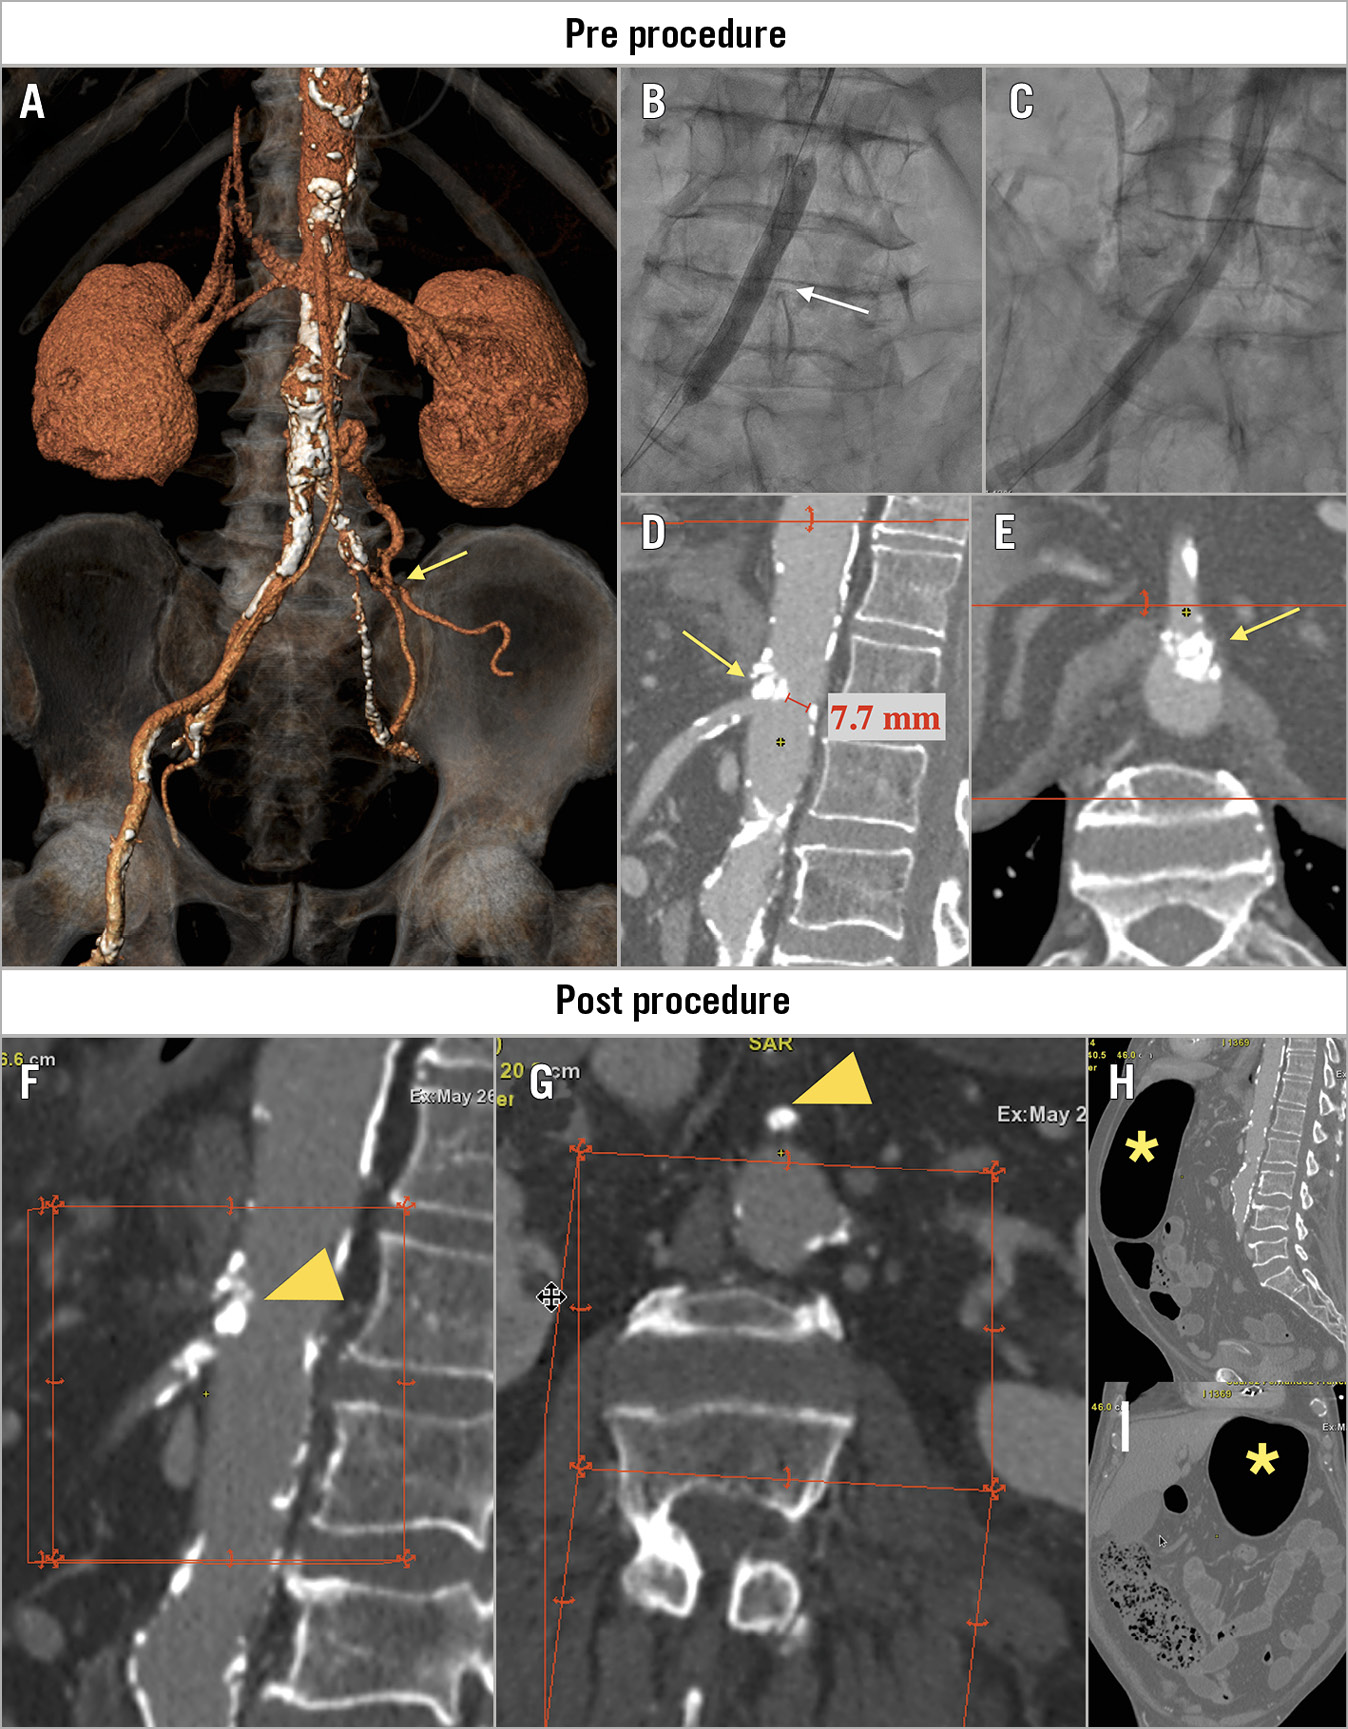 Figure 1. Pre- and post-procedure imaging. A) 3D-CT showing severe and extensive calcification of the descending aorta, iliac and femoral arteries along with a chronic common left iliac artery occlusion (yellow arrow). B) Intravascular lithotripsy (IVL) of the right iliac artery (white arrow). C) Iliac angiography post IVL. D) & E) Pre-procedure CT showing a calcified nodule at the origin of the superior mesenteric artery (SMA) without flow compromise (yellow arrows). F) & G) Occlusion of the SMA due to an eruptive calcified nodule protruding into the lumen (yellow arrowheads). H) & I) Abdominal CT showing a large gastric bubble and distended transverse colon loops (yellow asterisks).